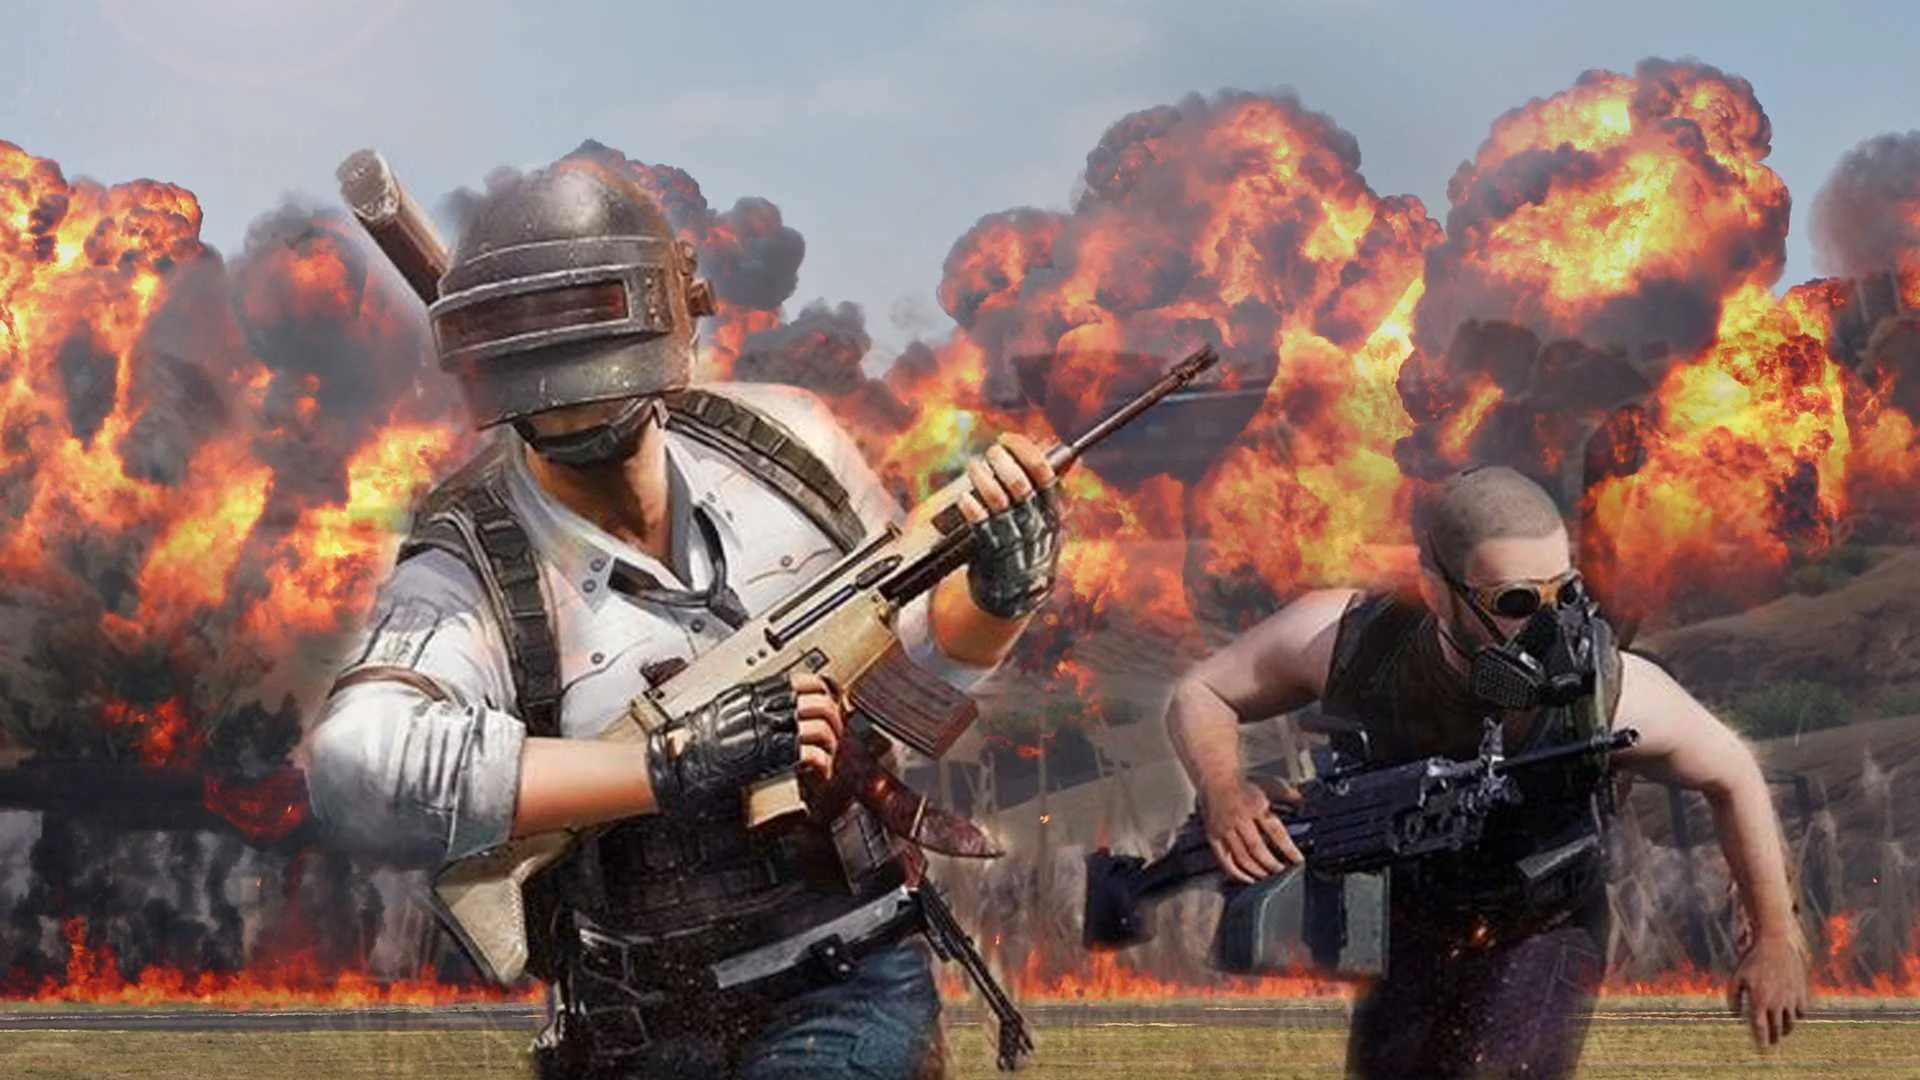 Battlefield-like destructibility will be coming to PUBG